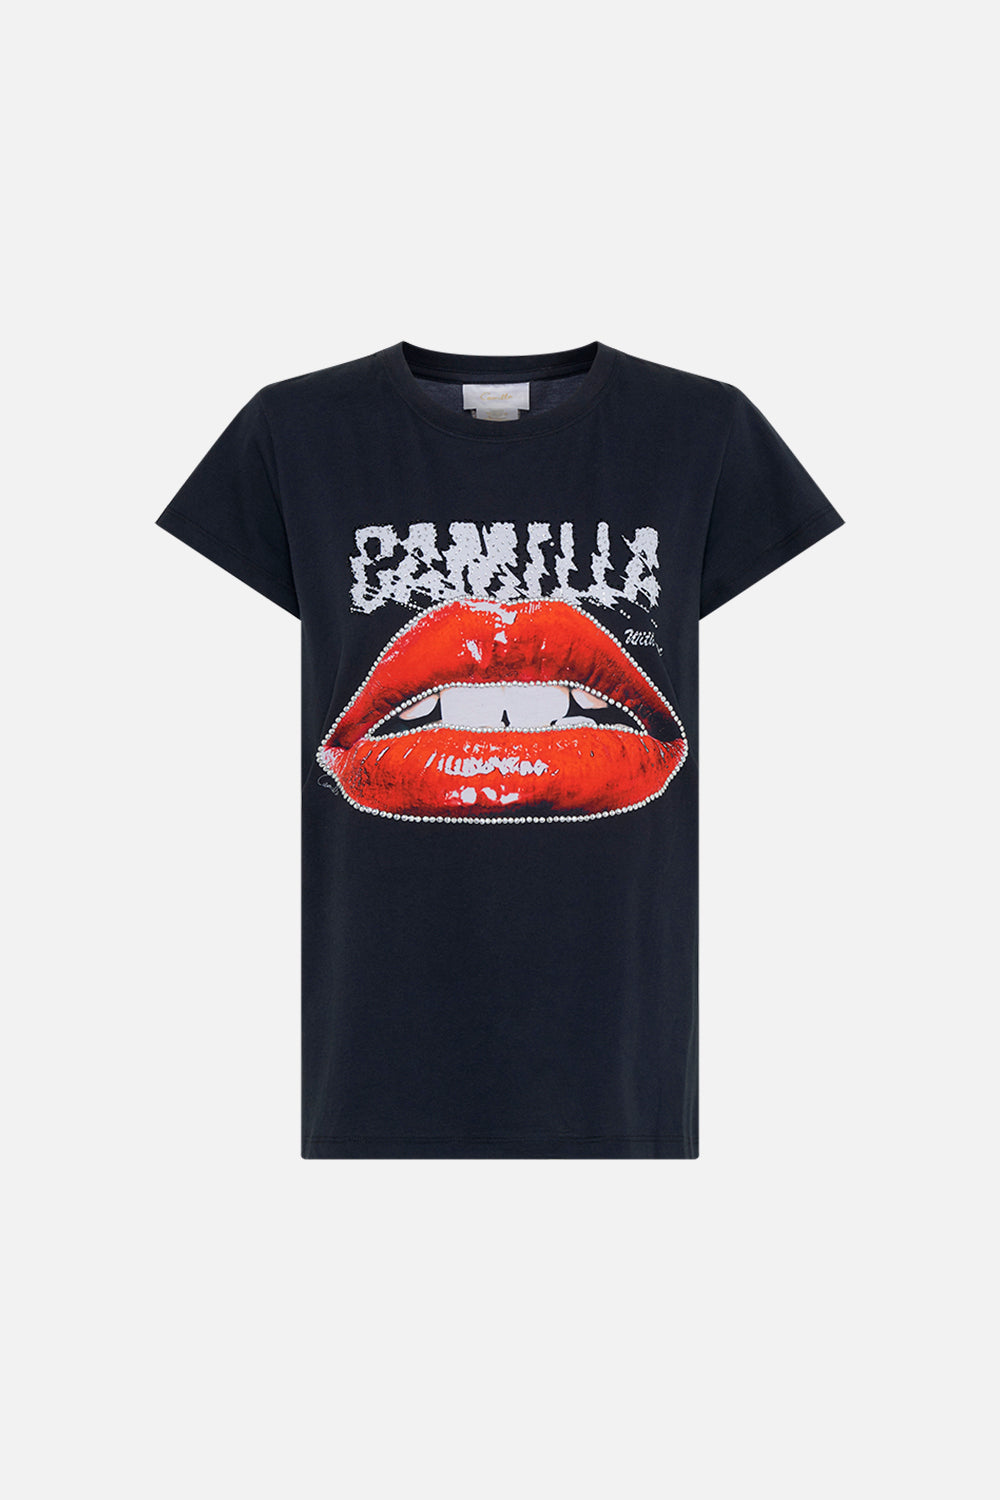 Product view of CAMILLA black graphic tee in Chaos Magic print 